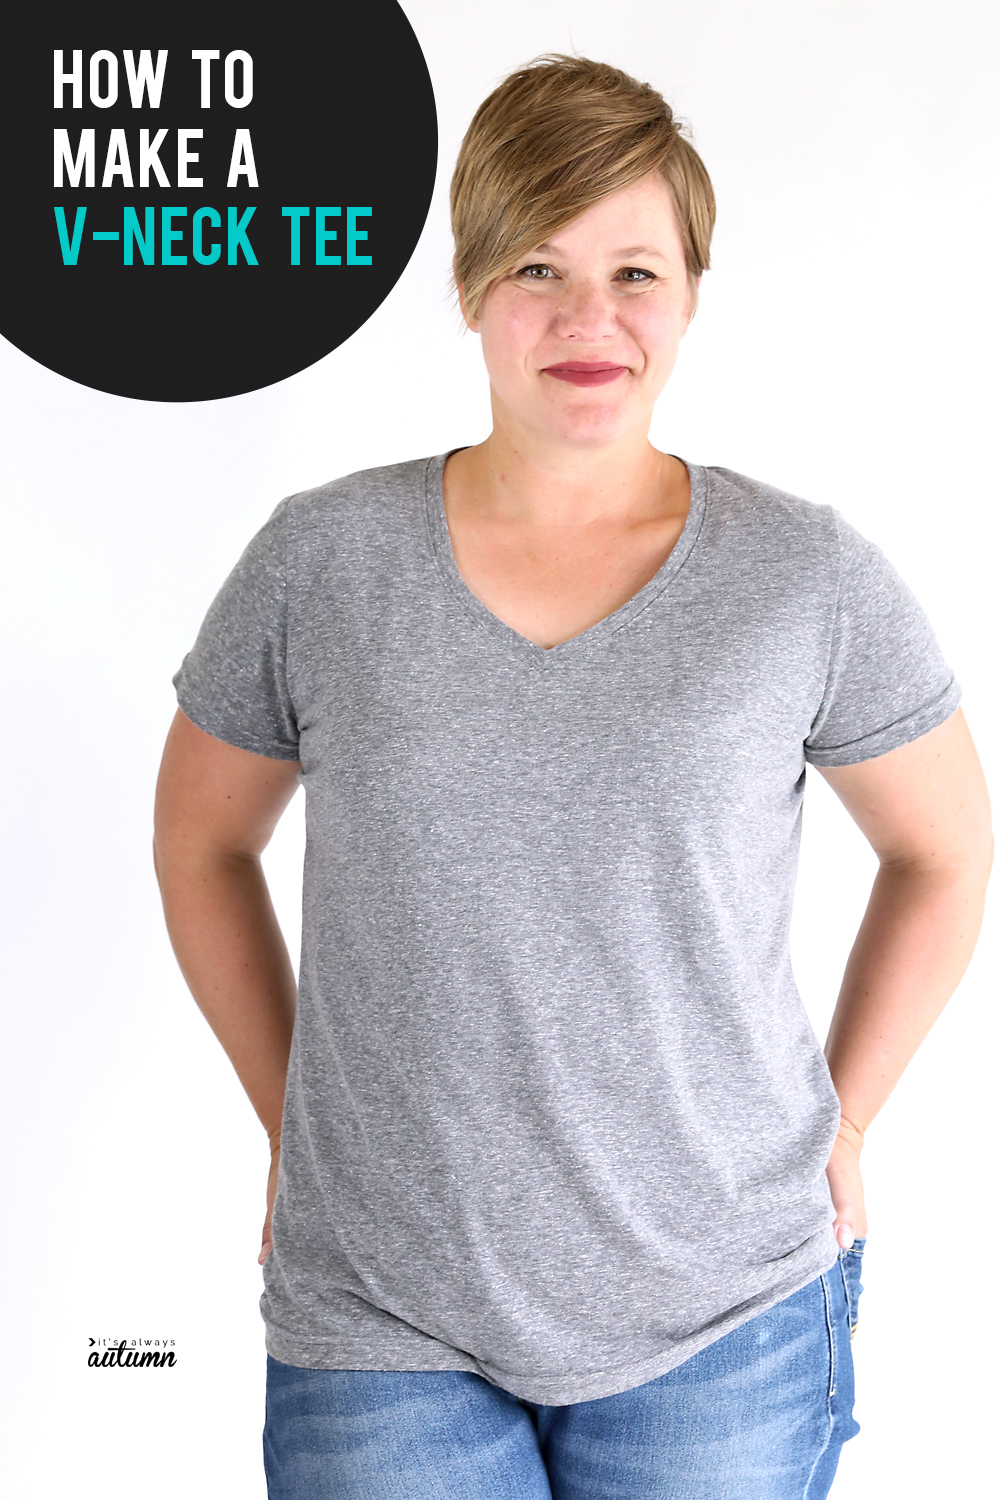 How to make a v-neck t-shirt. V-neck tee sewing pattern and tutorial.